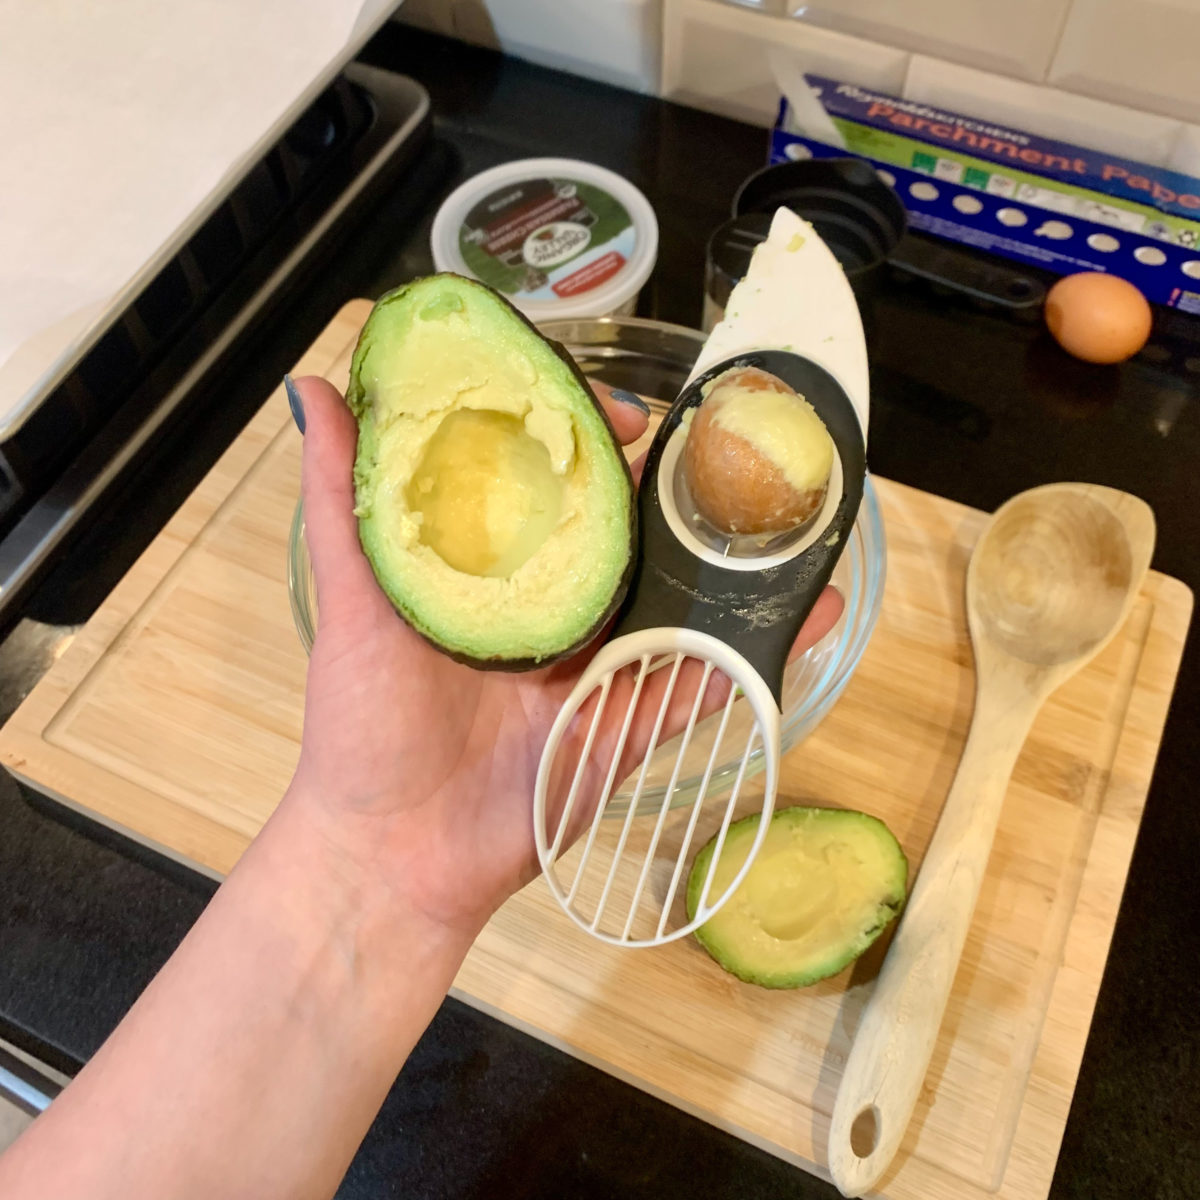 5-ingredient avocado chips recipe from tiktok is a must try